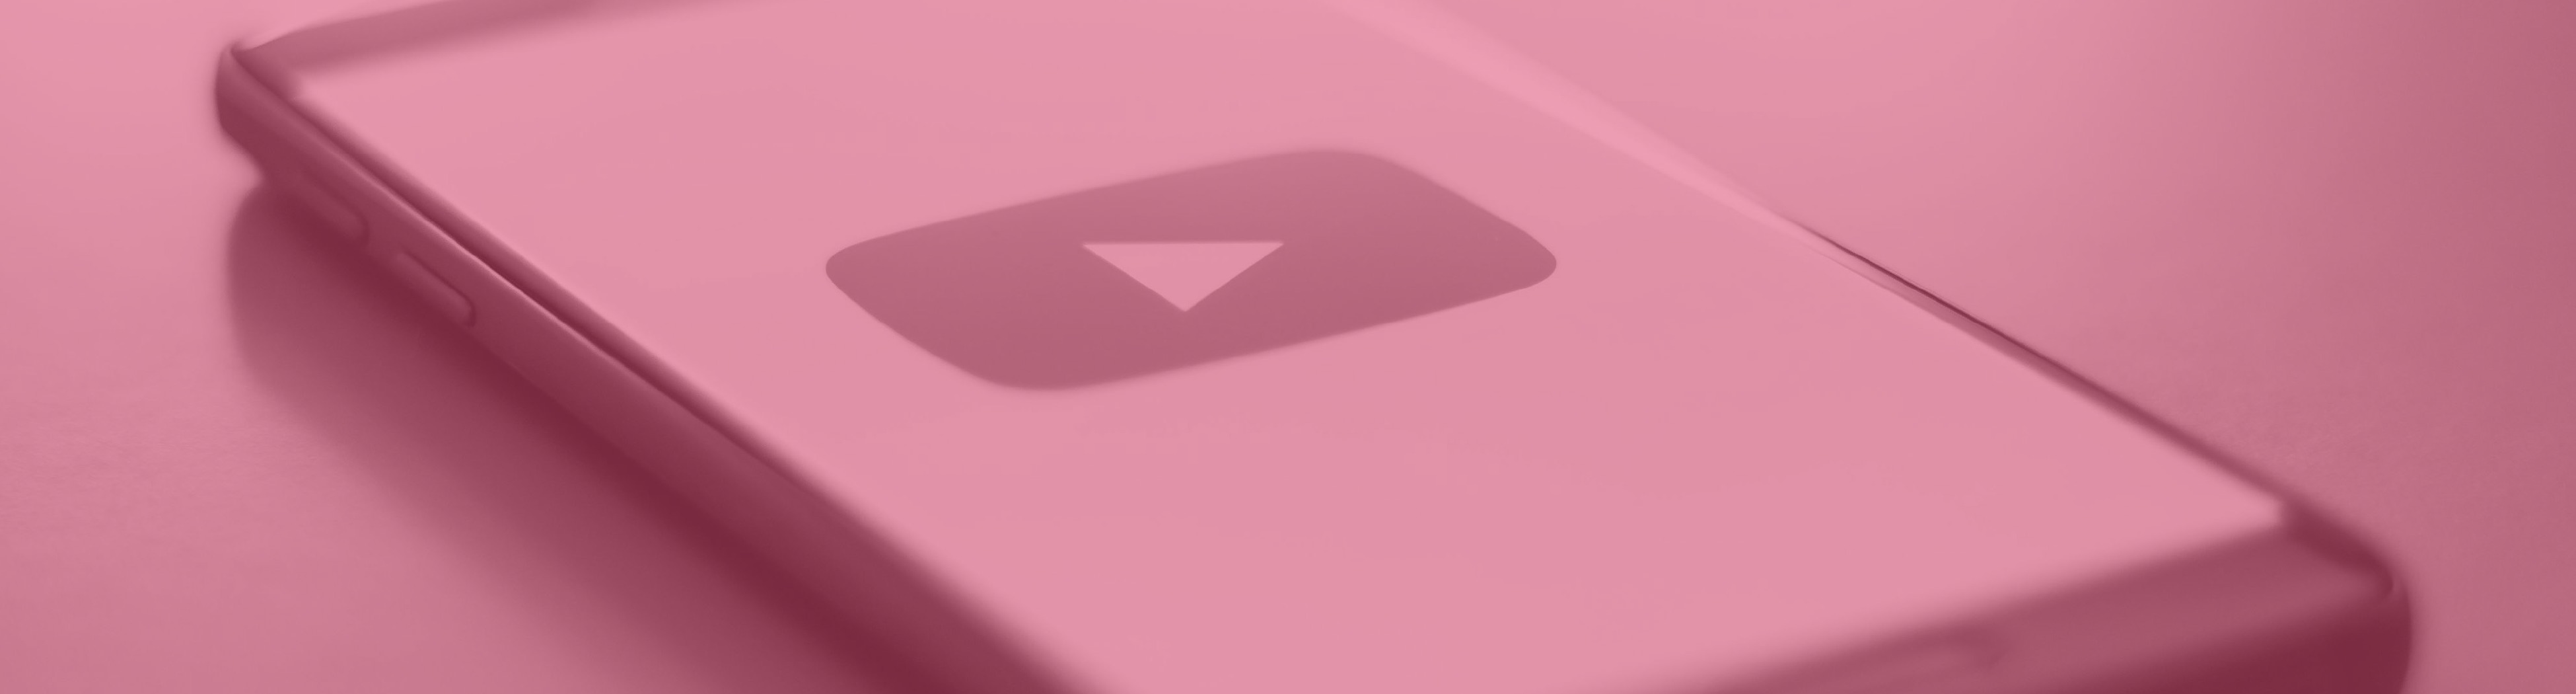 YouTube for Breast Cancer Advocacy